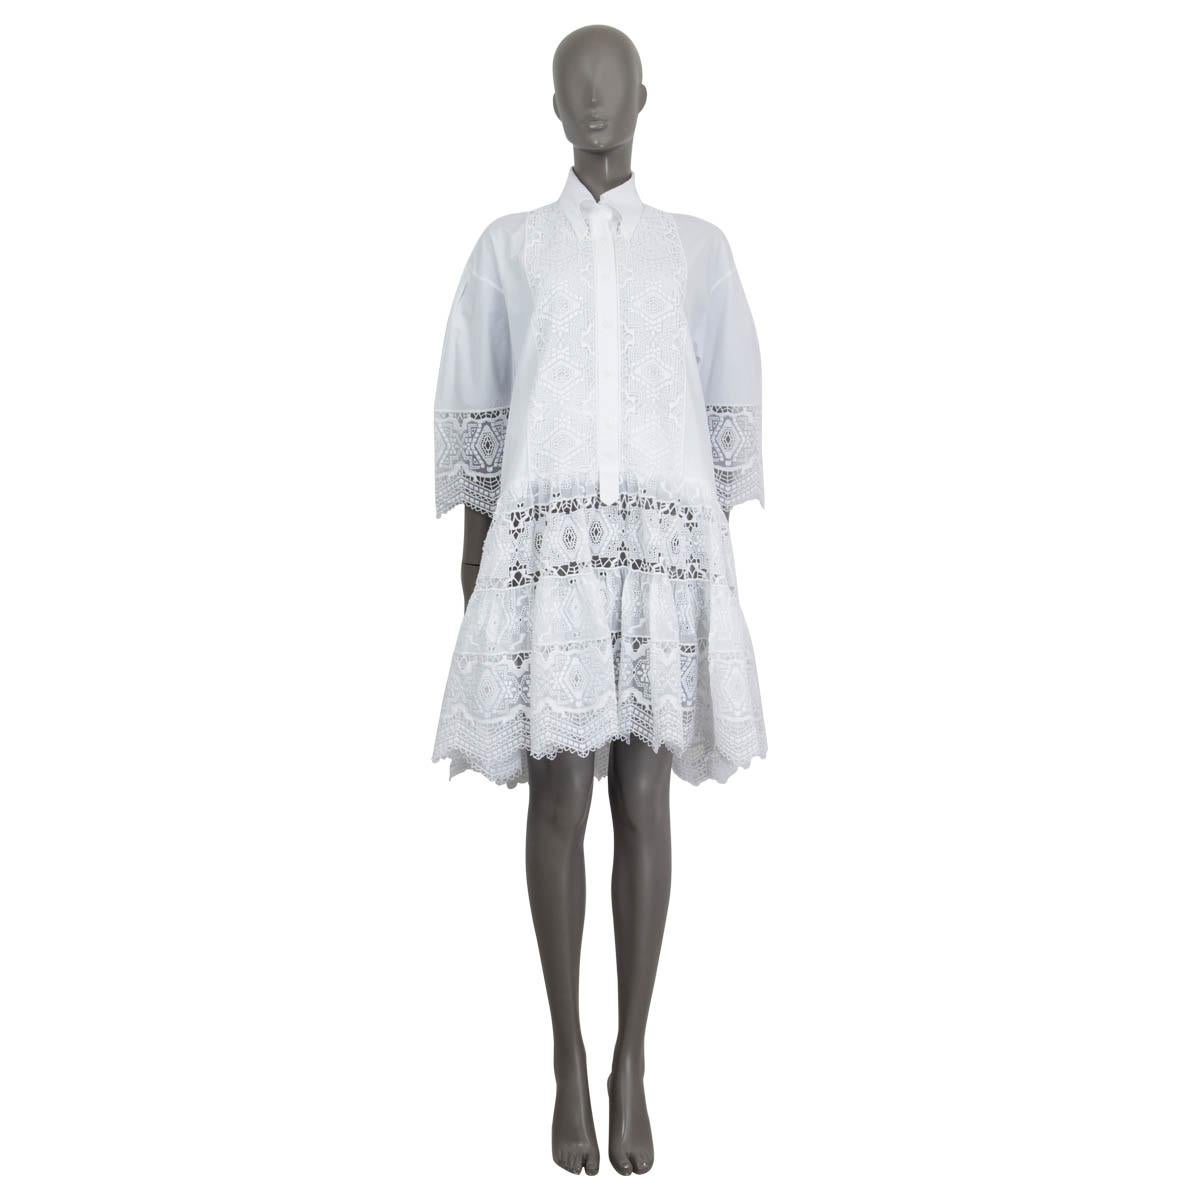 100% authentic Ermanno Scervino button down shirt in white cotton (80%) and polyester (20%). Features 3/4 sleeves and is embellished with broderie anglaise. Opens with six buttons on the front. Lined in white cotton (100%). Has some faint yellow